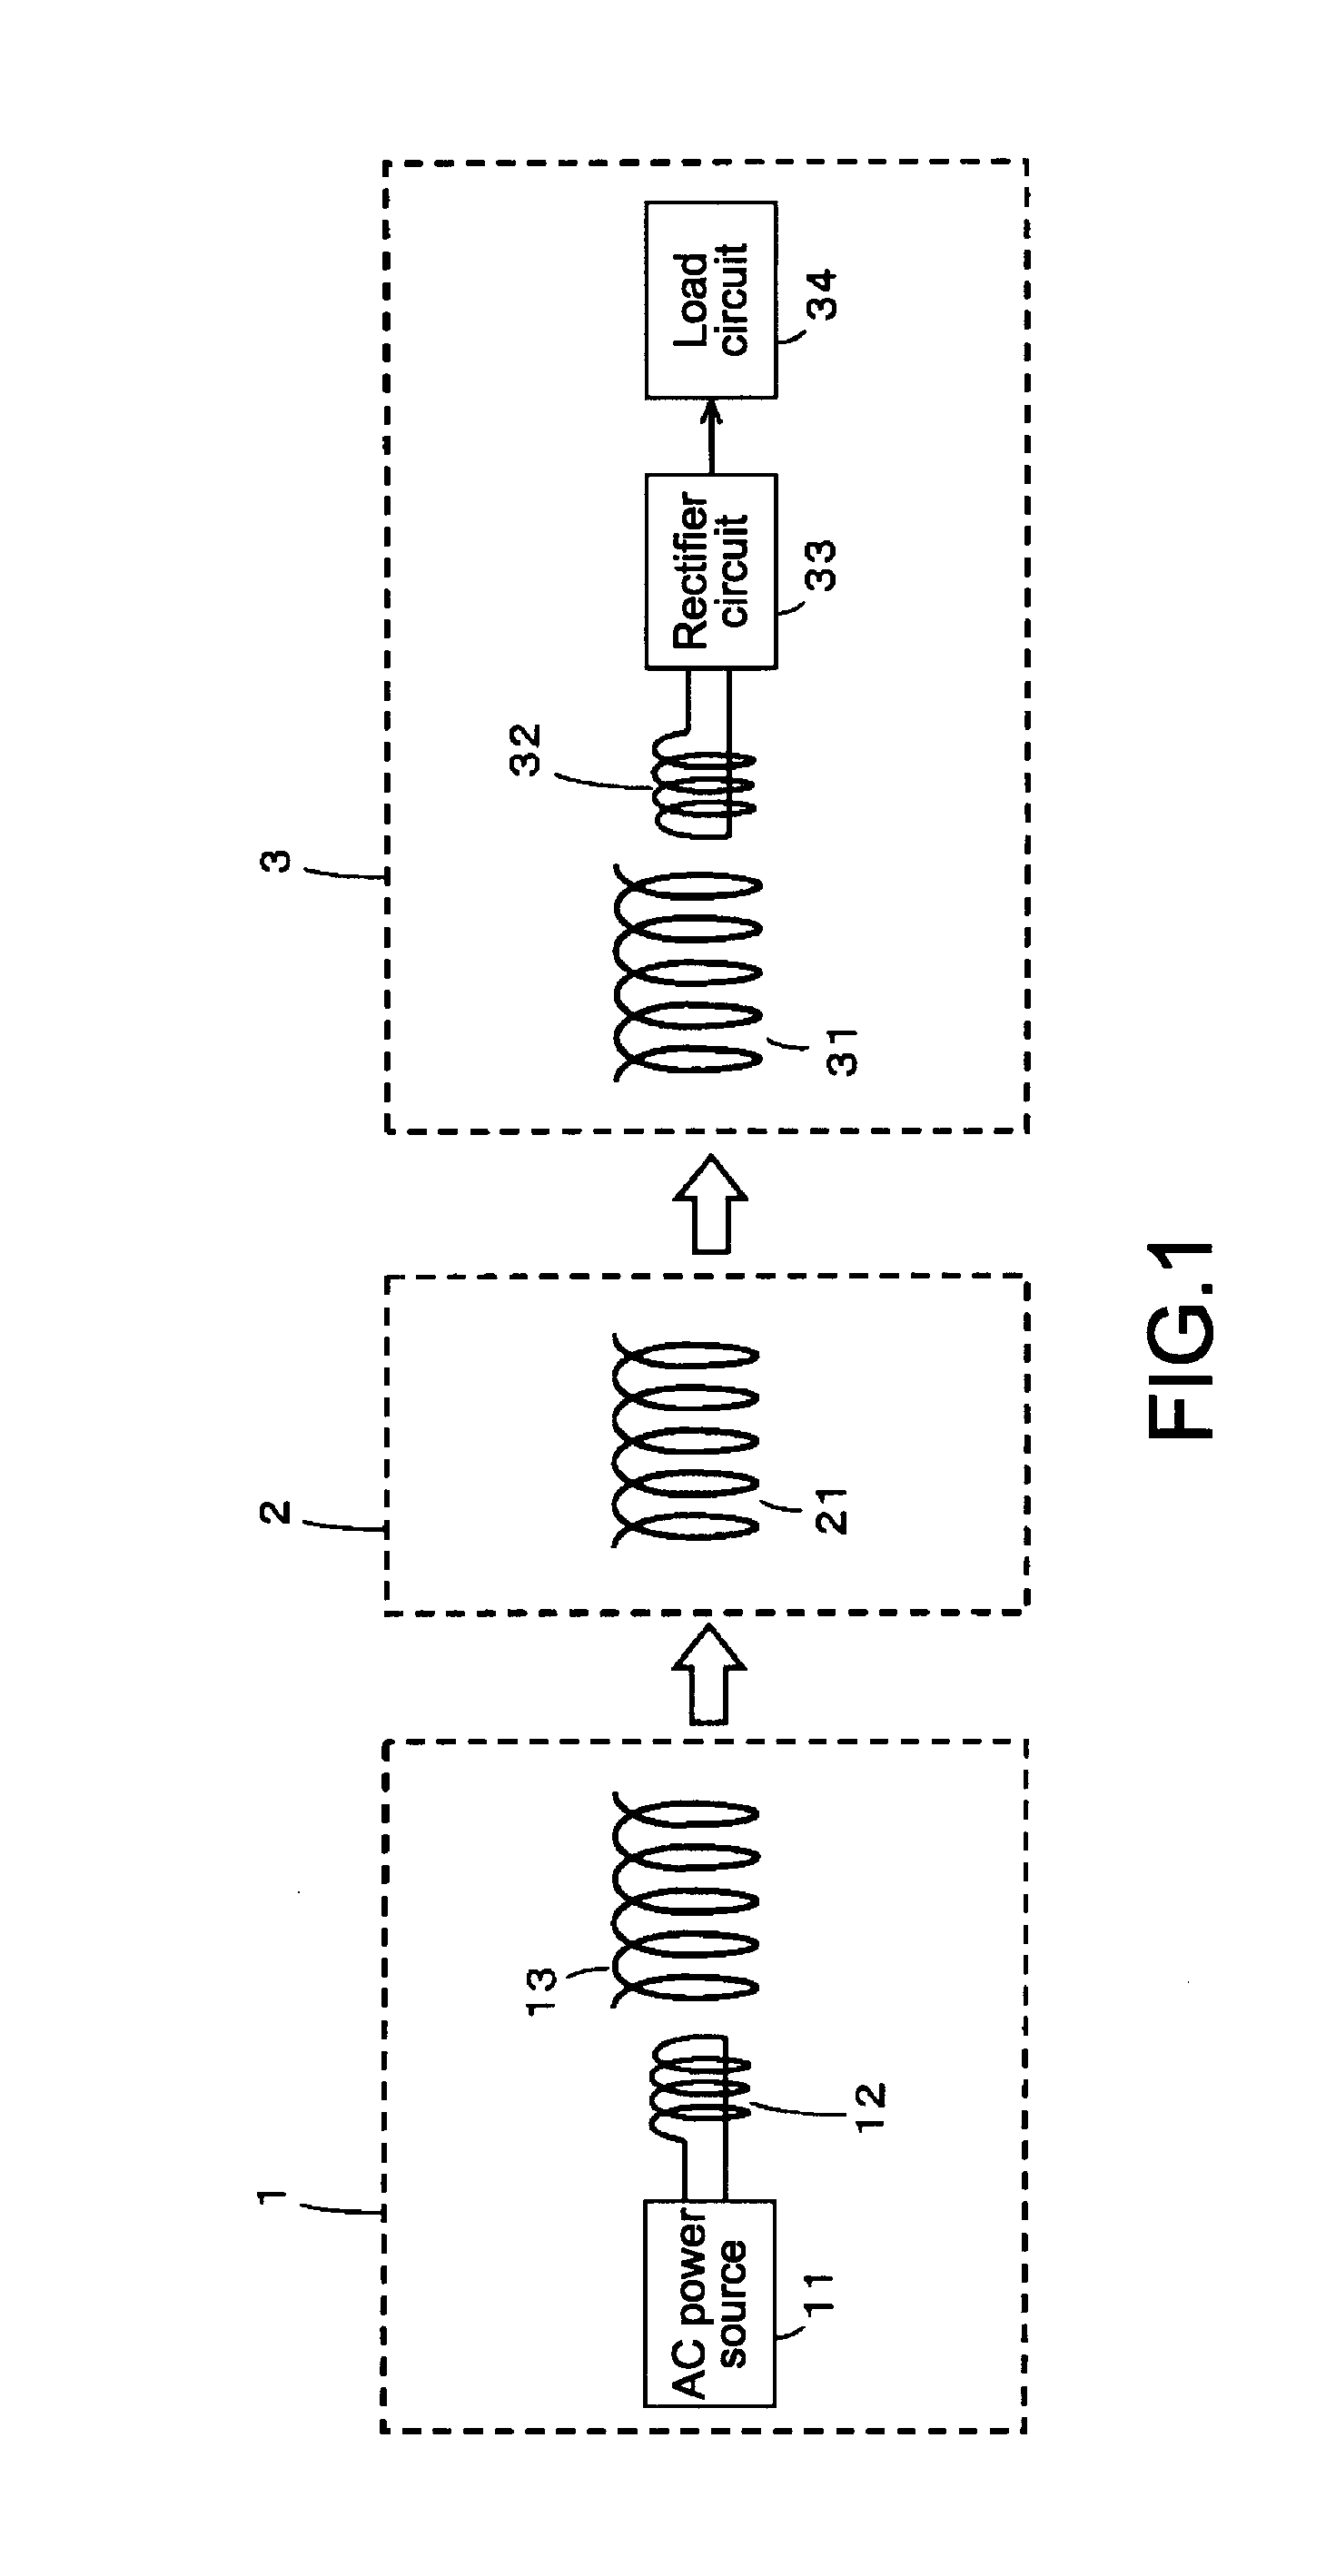 Noncontact power feed system, noncontact relay apparatus, noncontact power reception apparatus, and noncontact power feed method